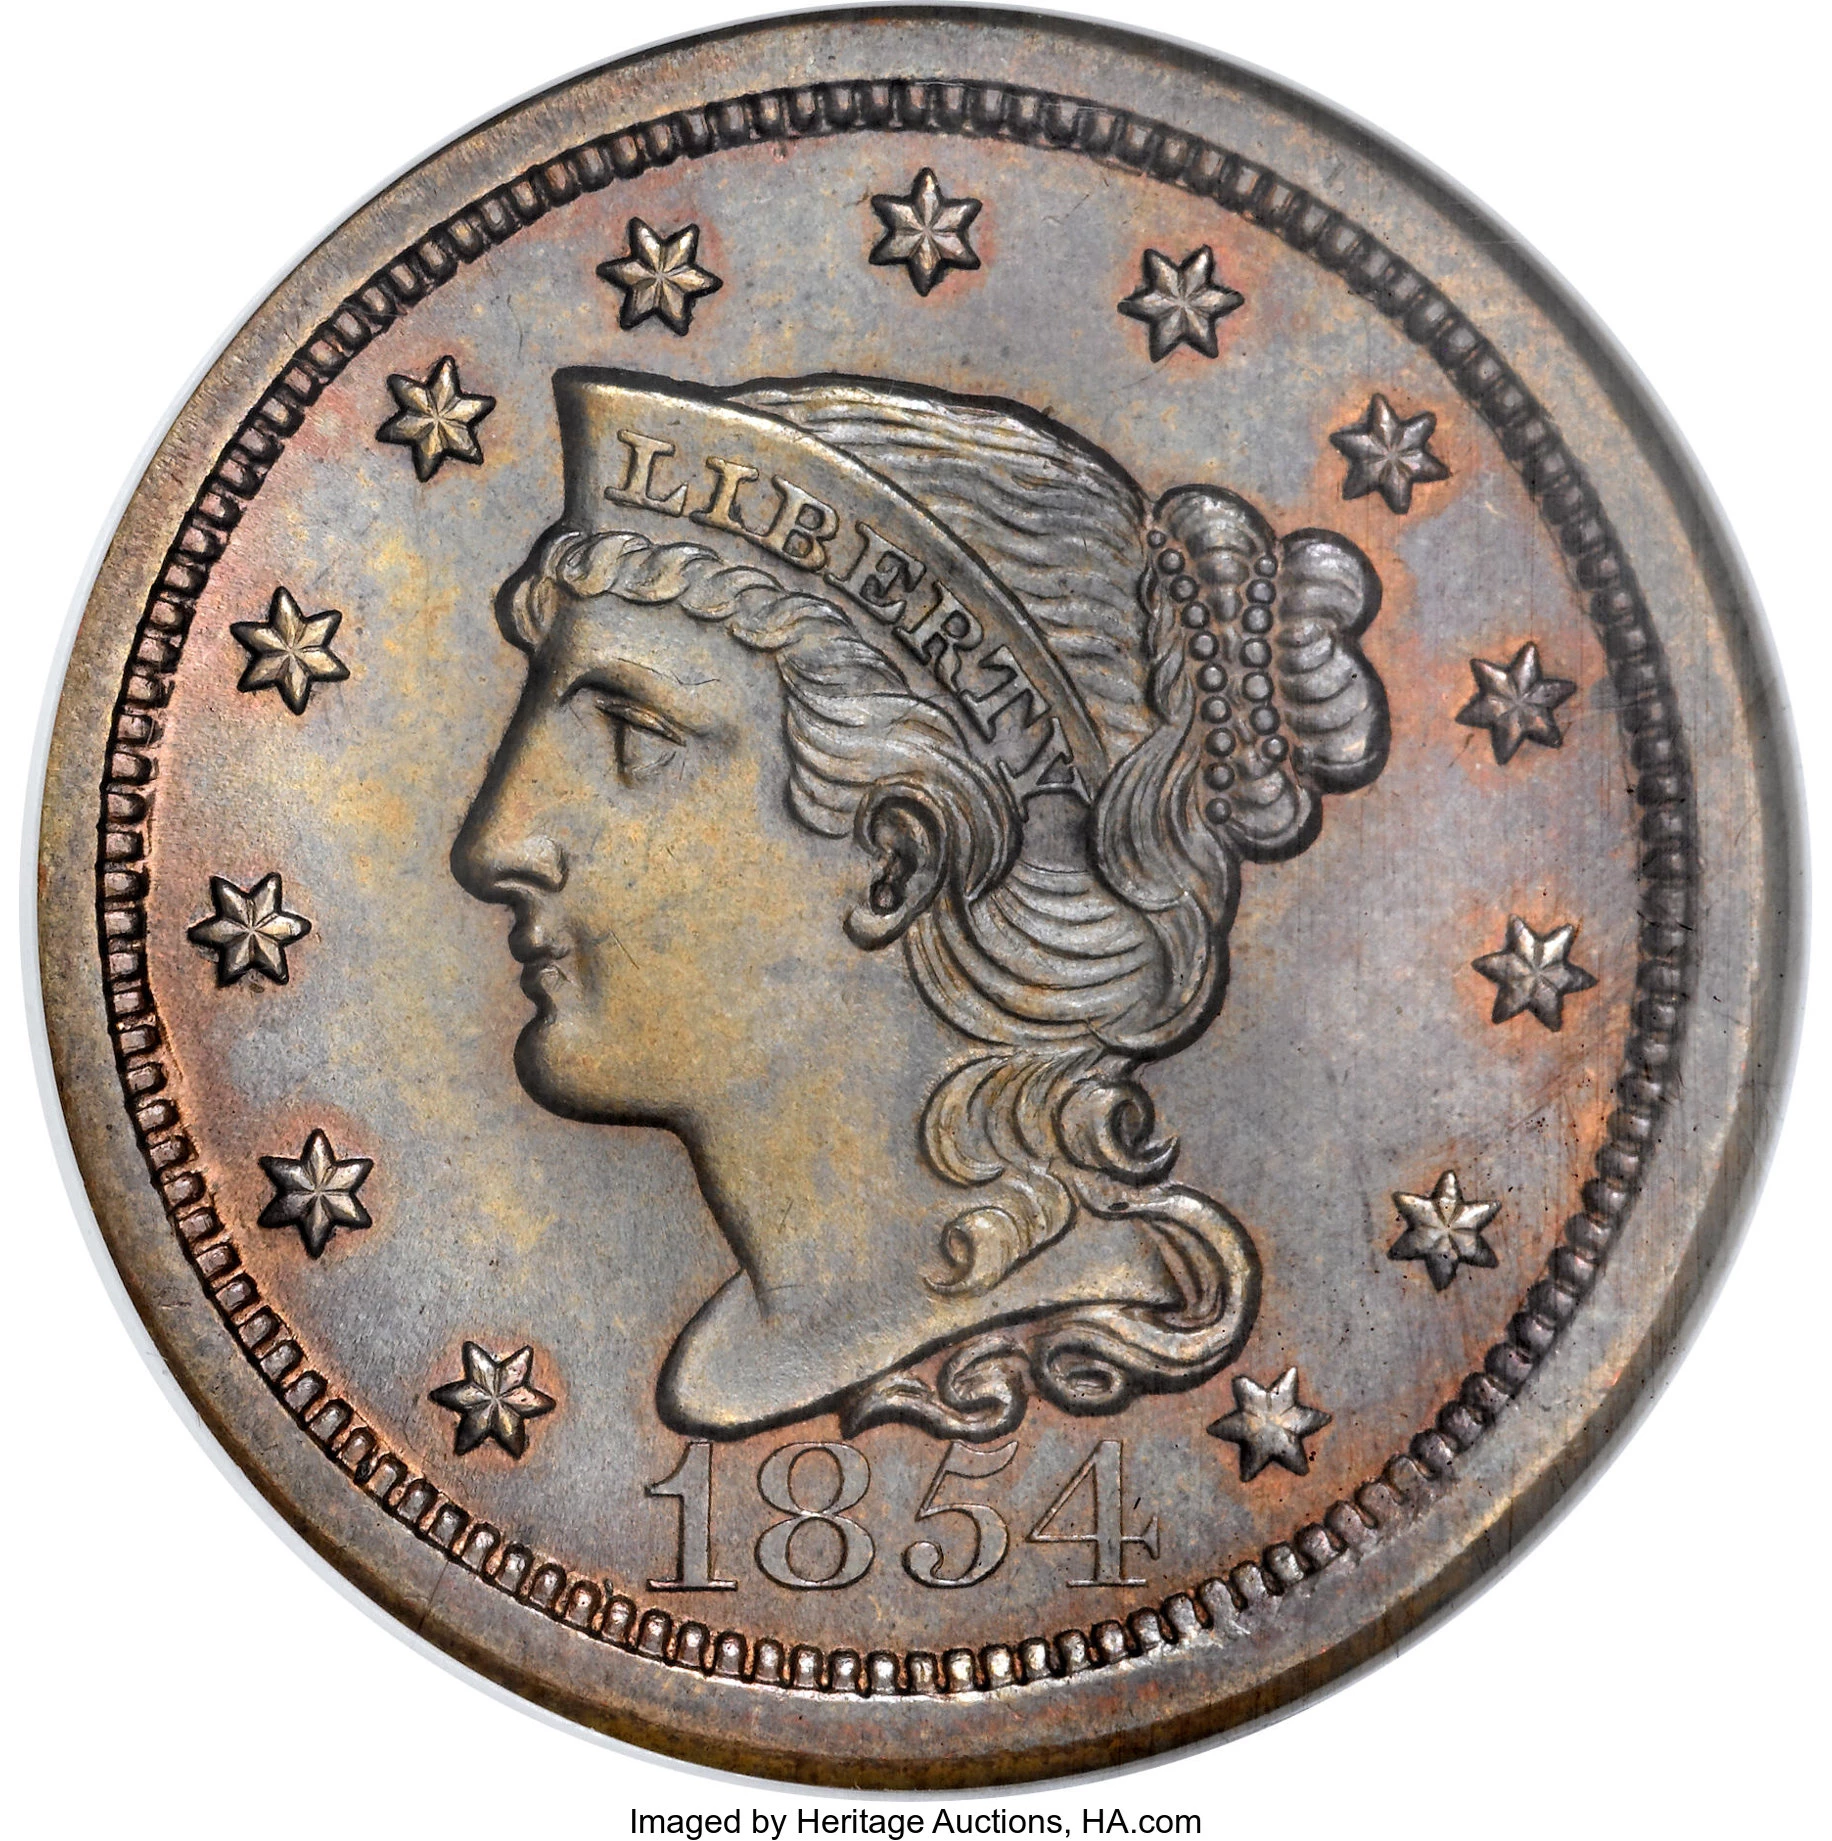 1854 Large Cent Matron Cent UNC Beautifully toned - US Coin